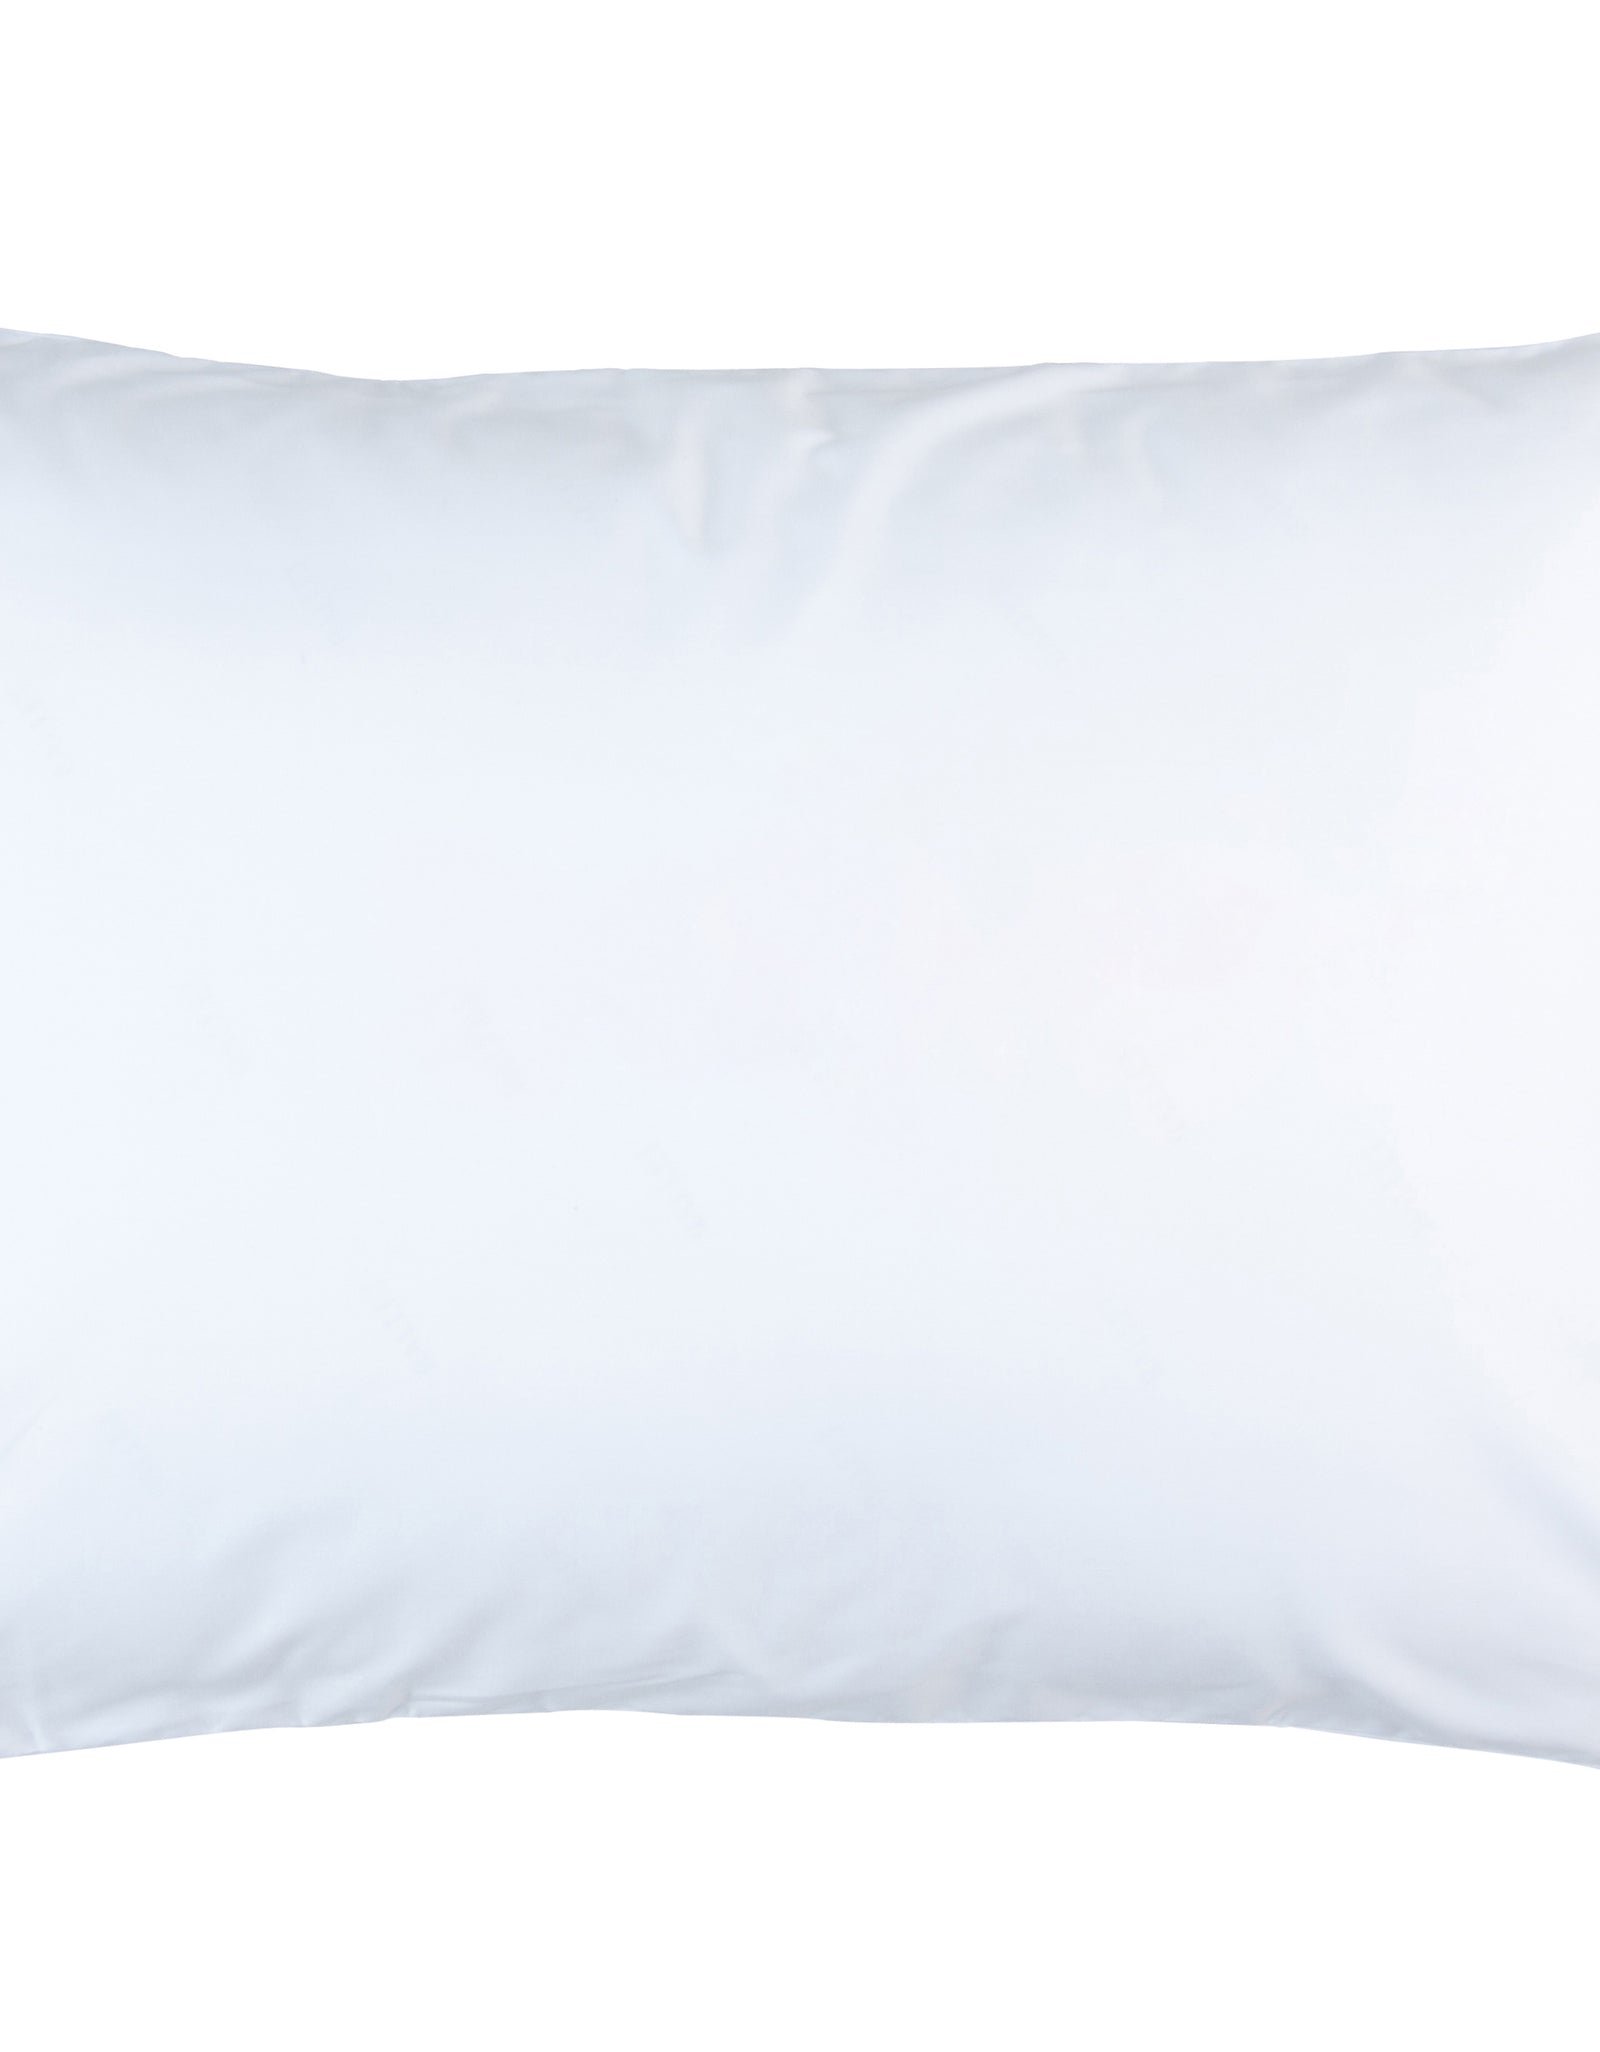 EXTRA FIRM Density Micro-Down Your Bed Pillow